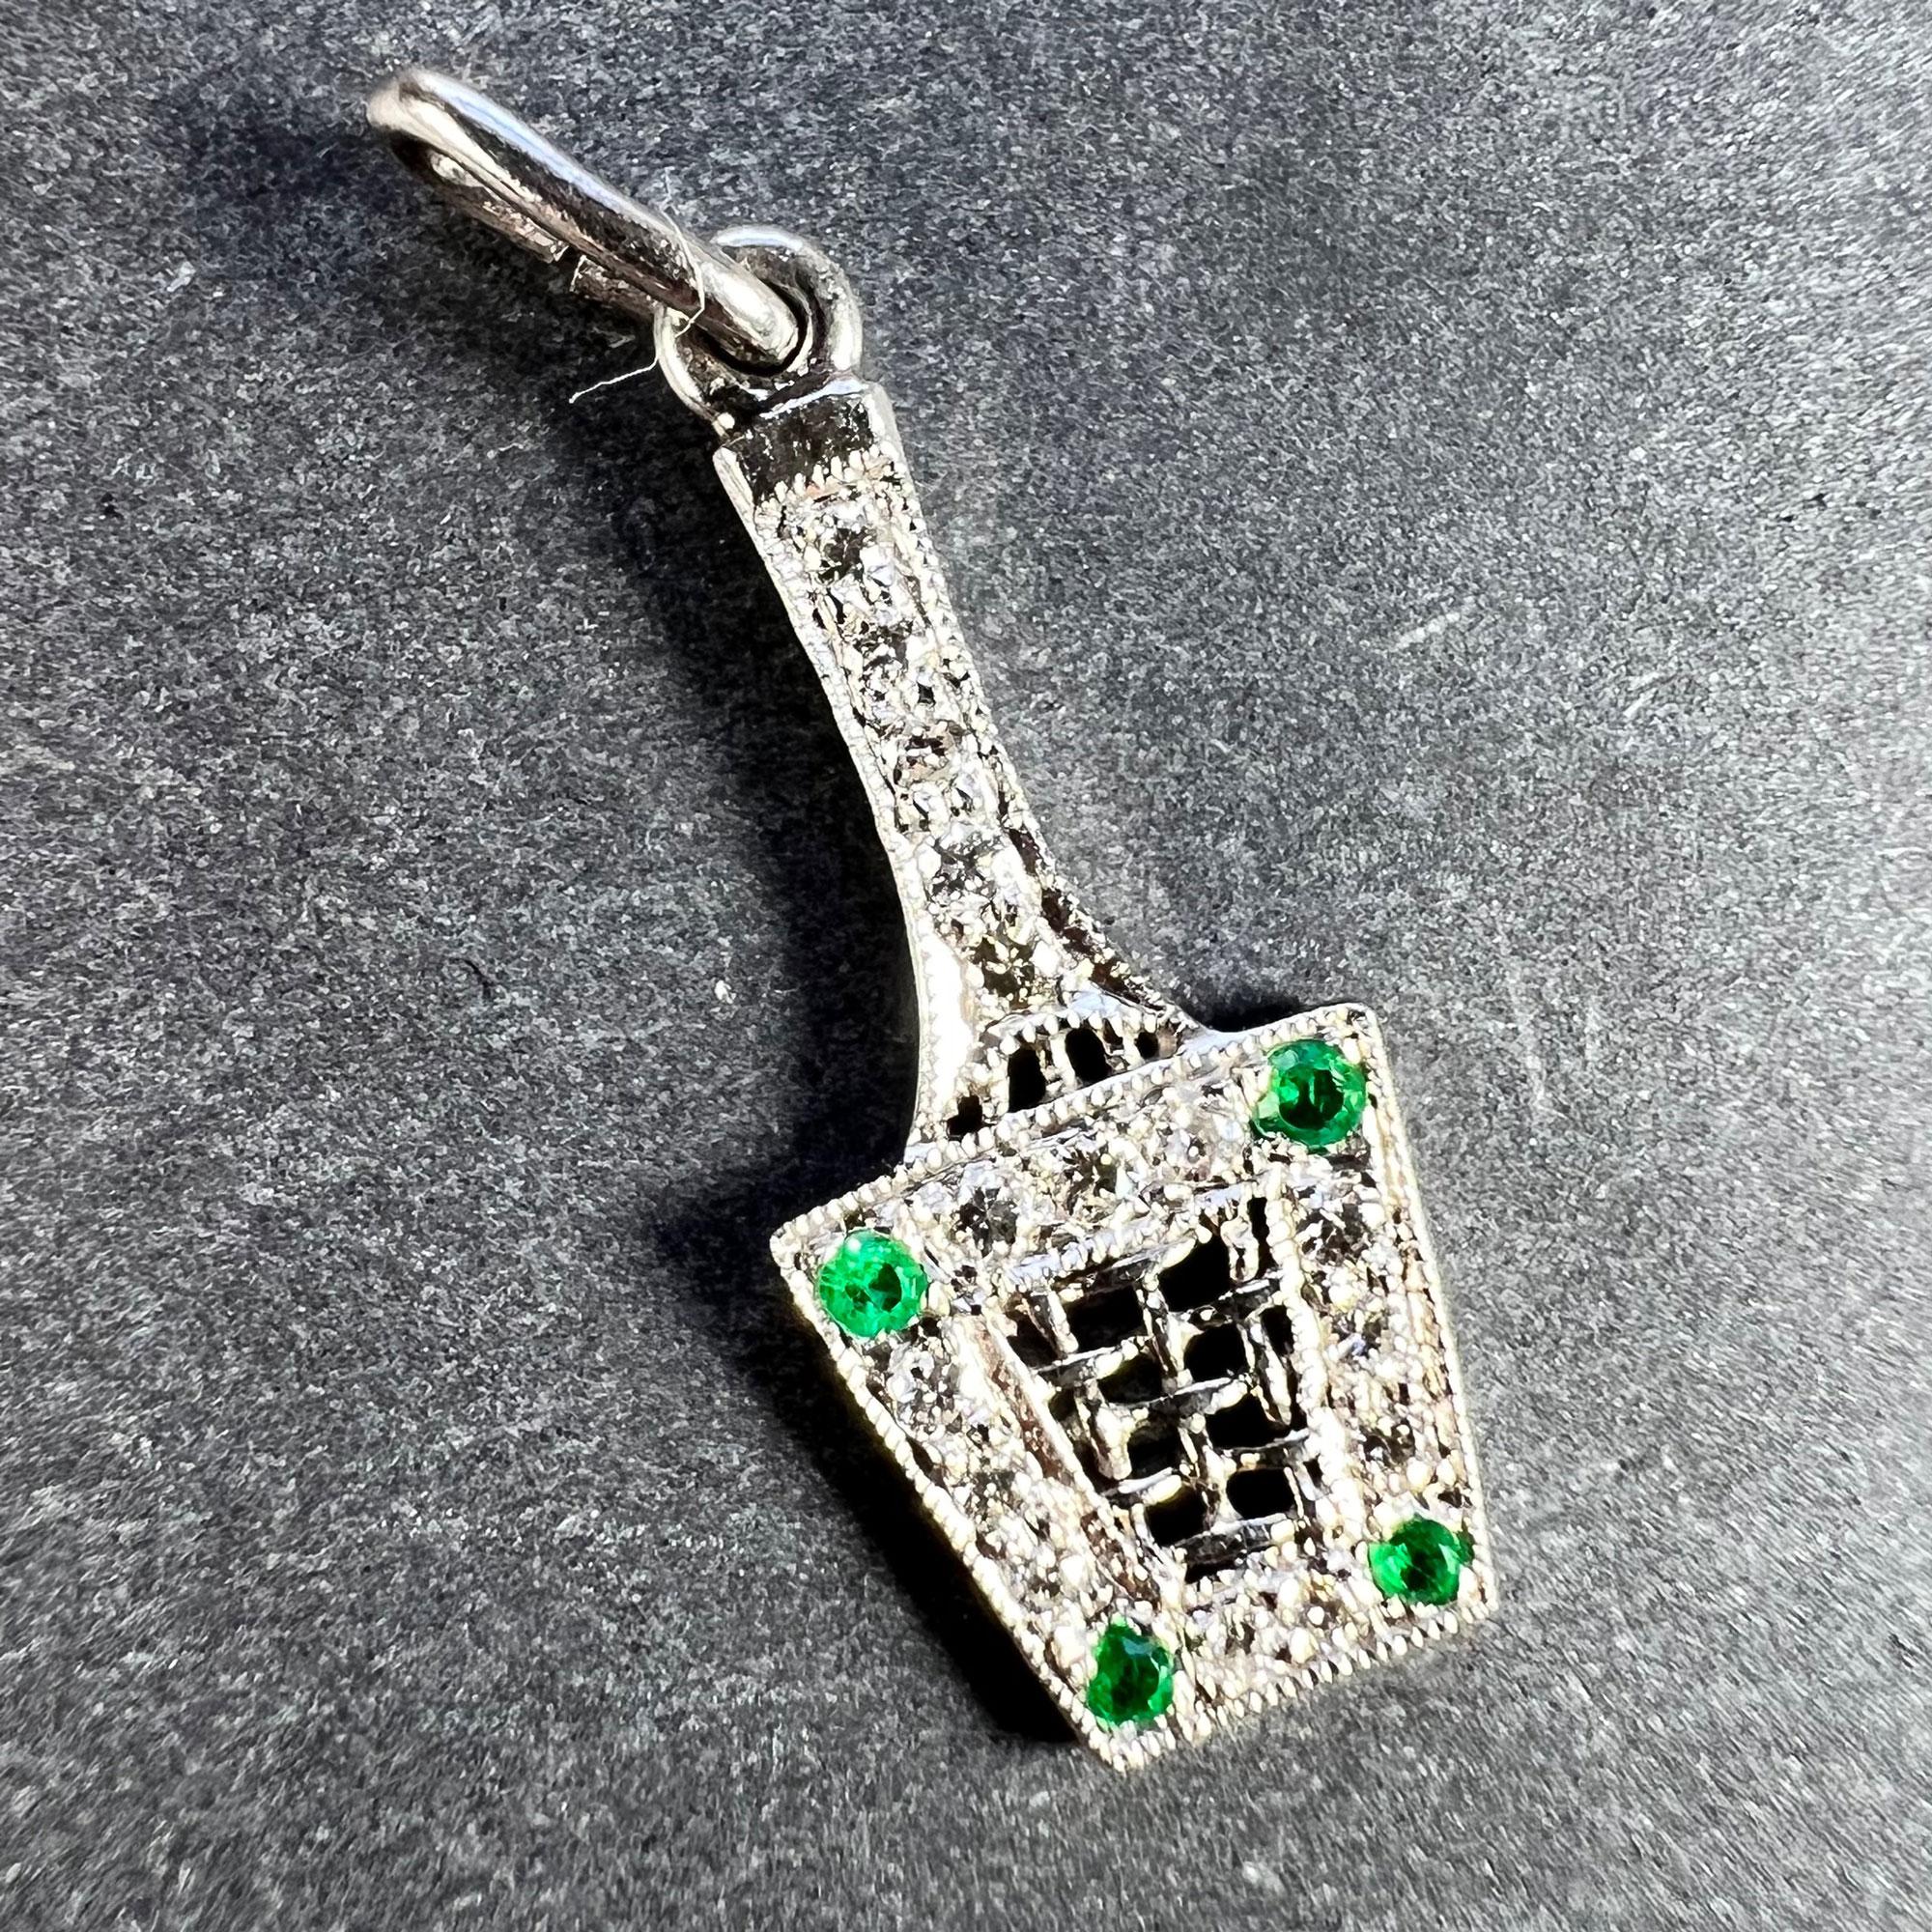 An Art Deco platinum charm pendant designed as a tennis racket in a press, set with 16 round brilliant cut white diamonds and four single-cut green emeralds. Unmarked but tested for platinum.

Gemstone weights: 
Diamonds: 0.32 carats (approximate